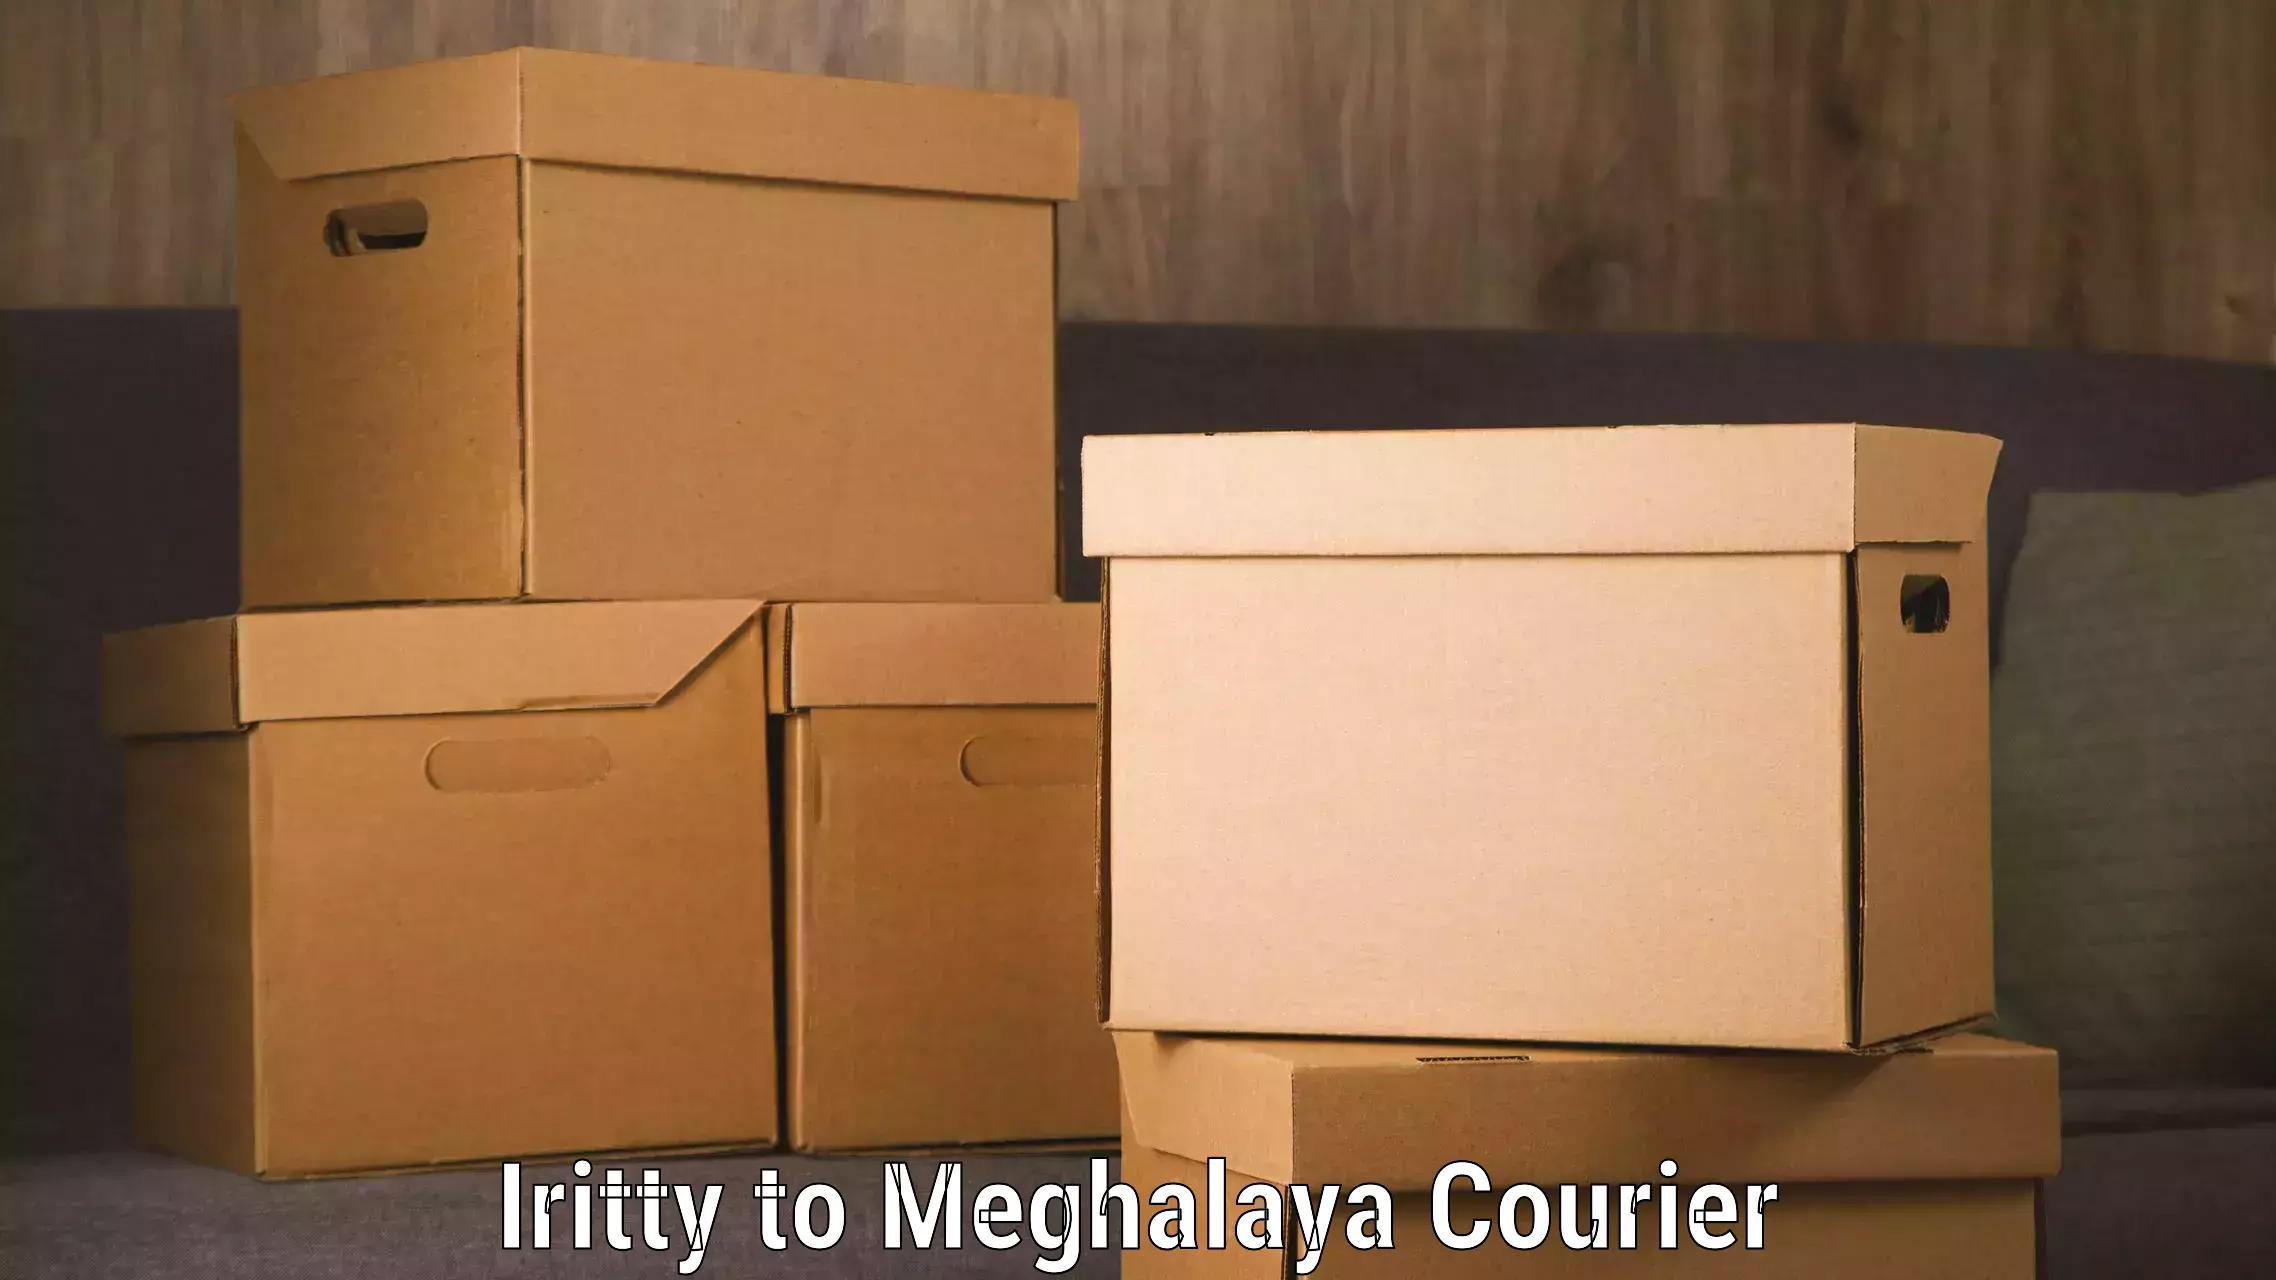 Express package delivery Iritty to Meghalaya